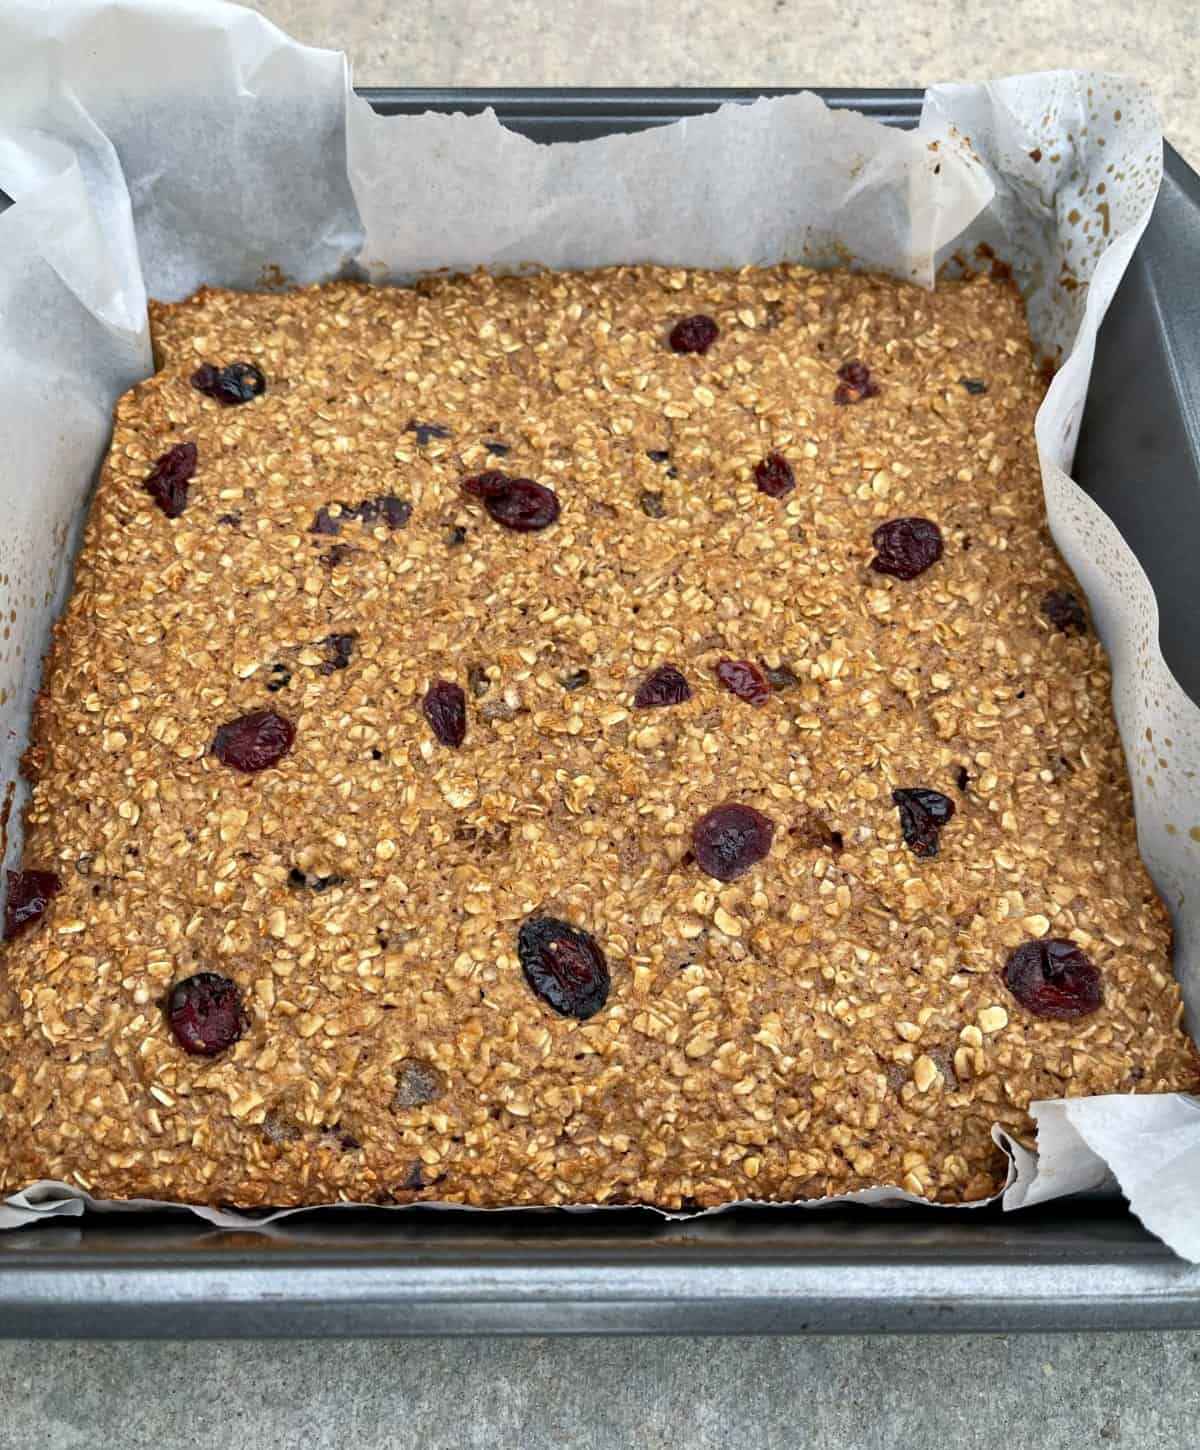 Cranberry ginger baked oatmeal in parchment lined baking pan.